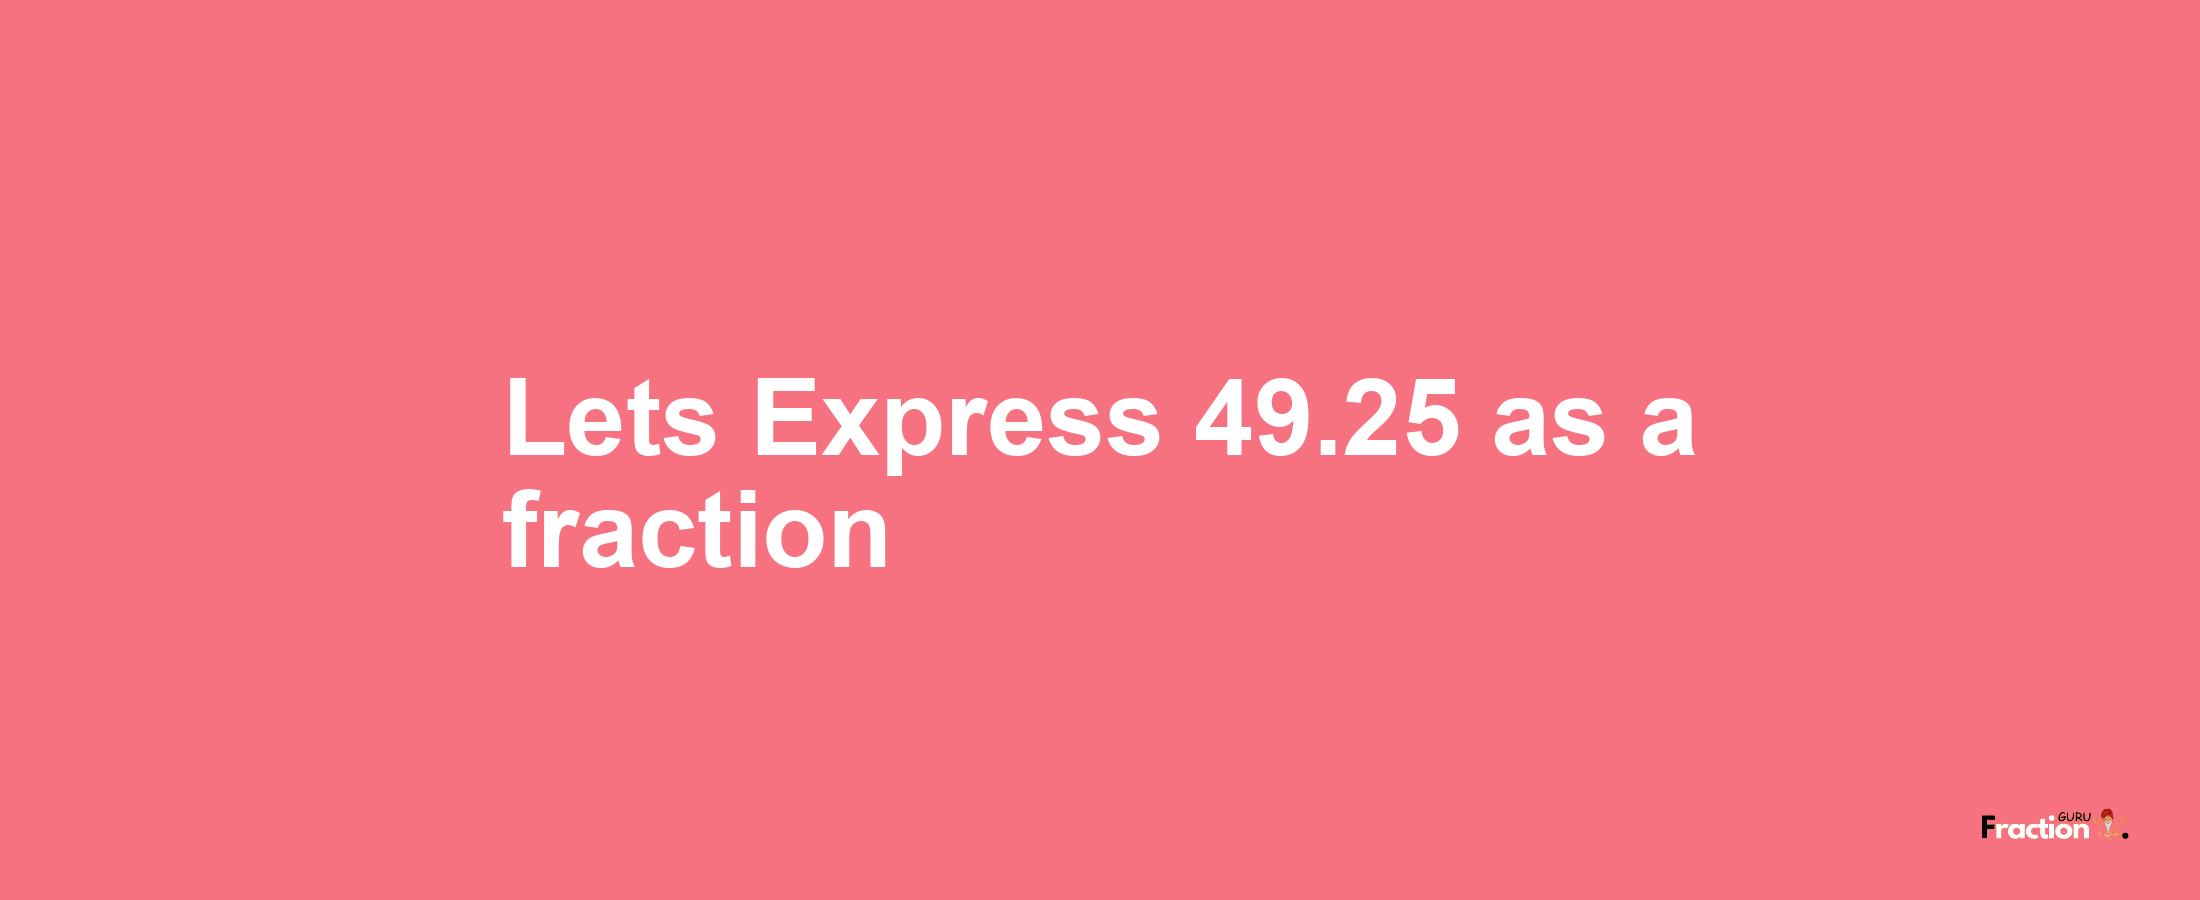 Lets Express 49.25 as afraction